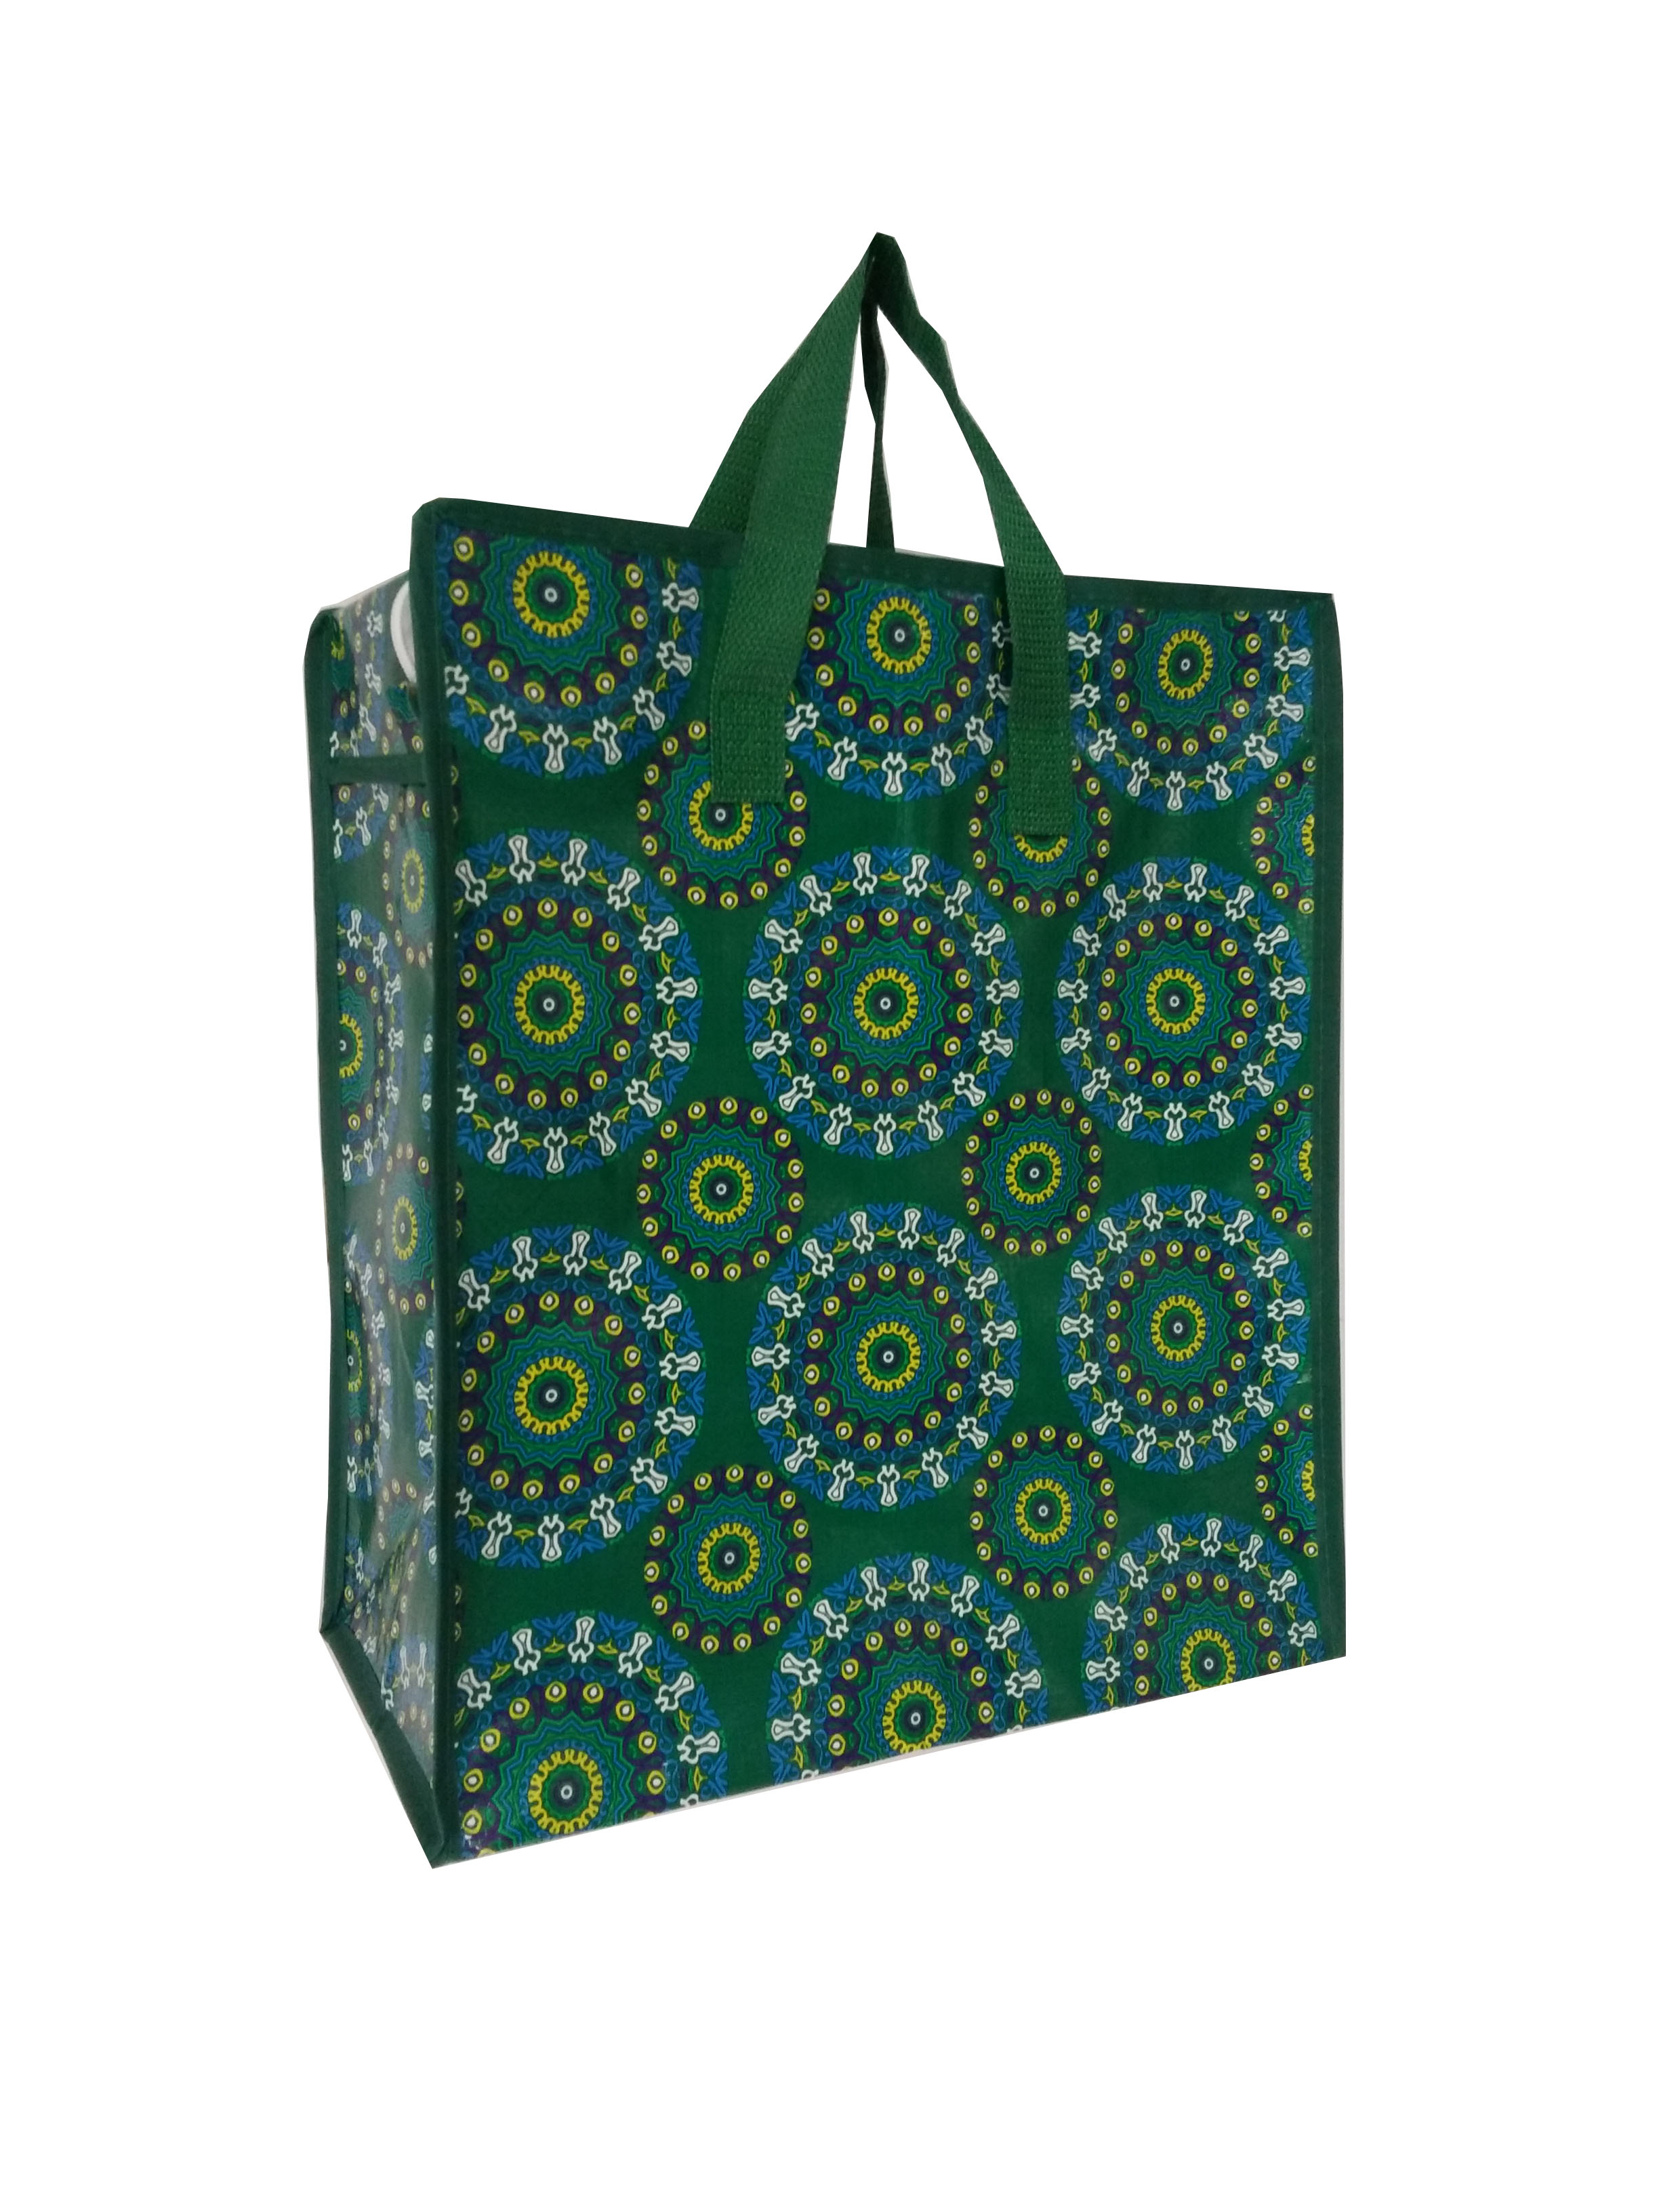 Green Grocery Bags